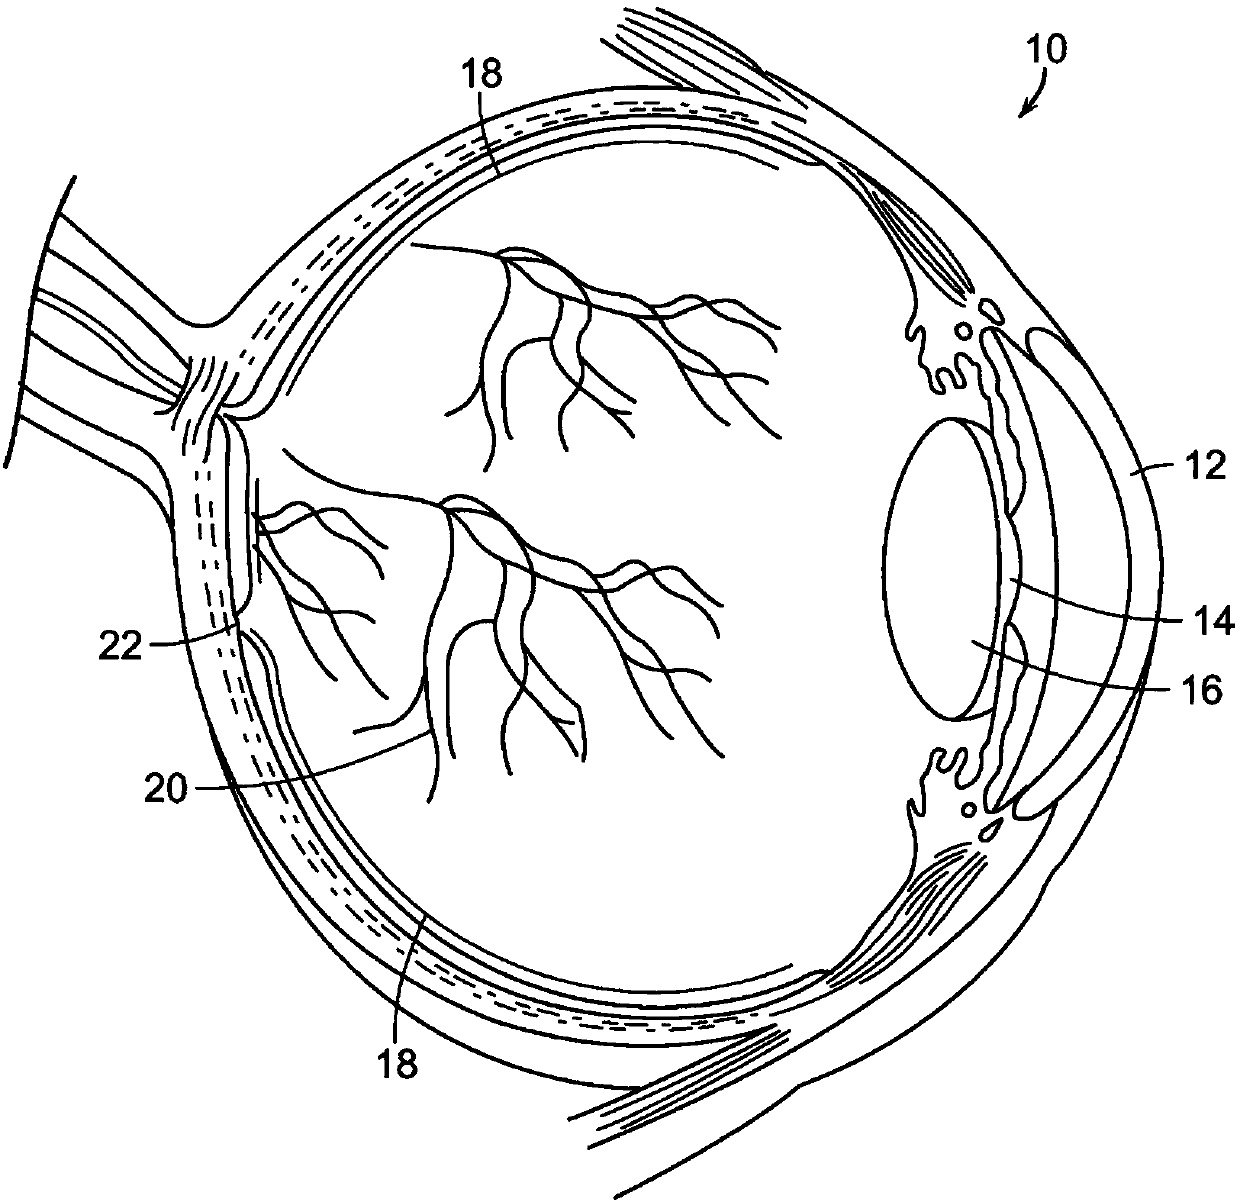 System and process for retina phototherapy